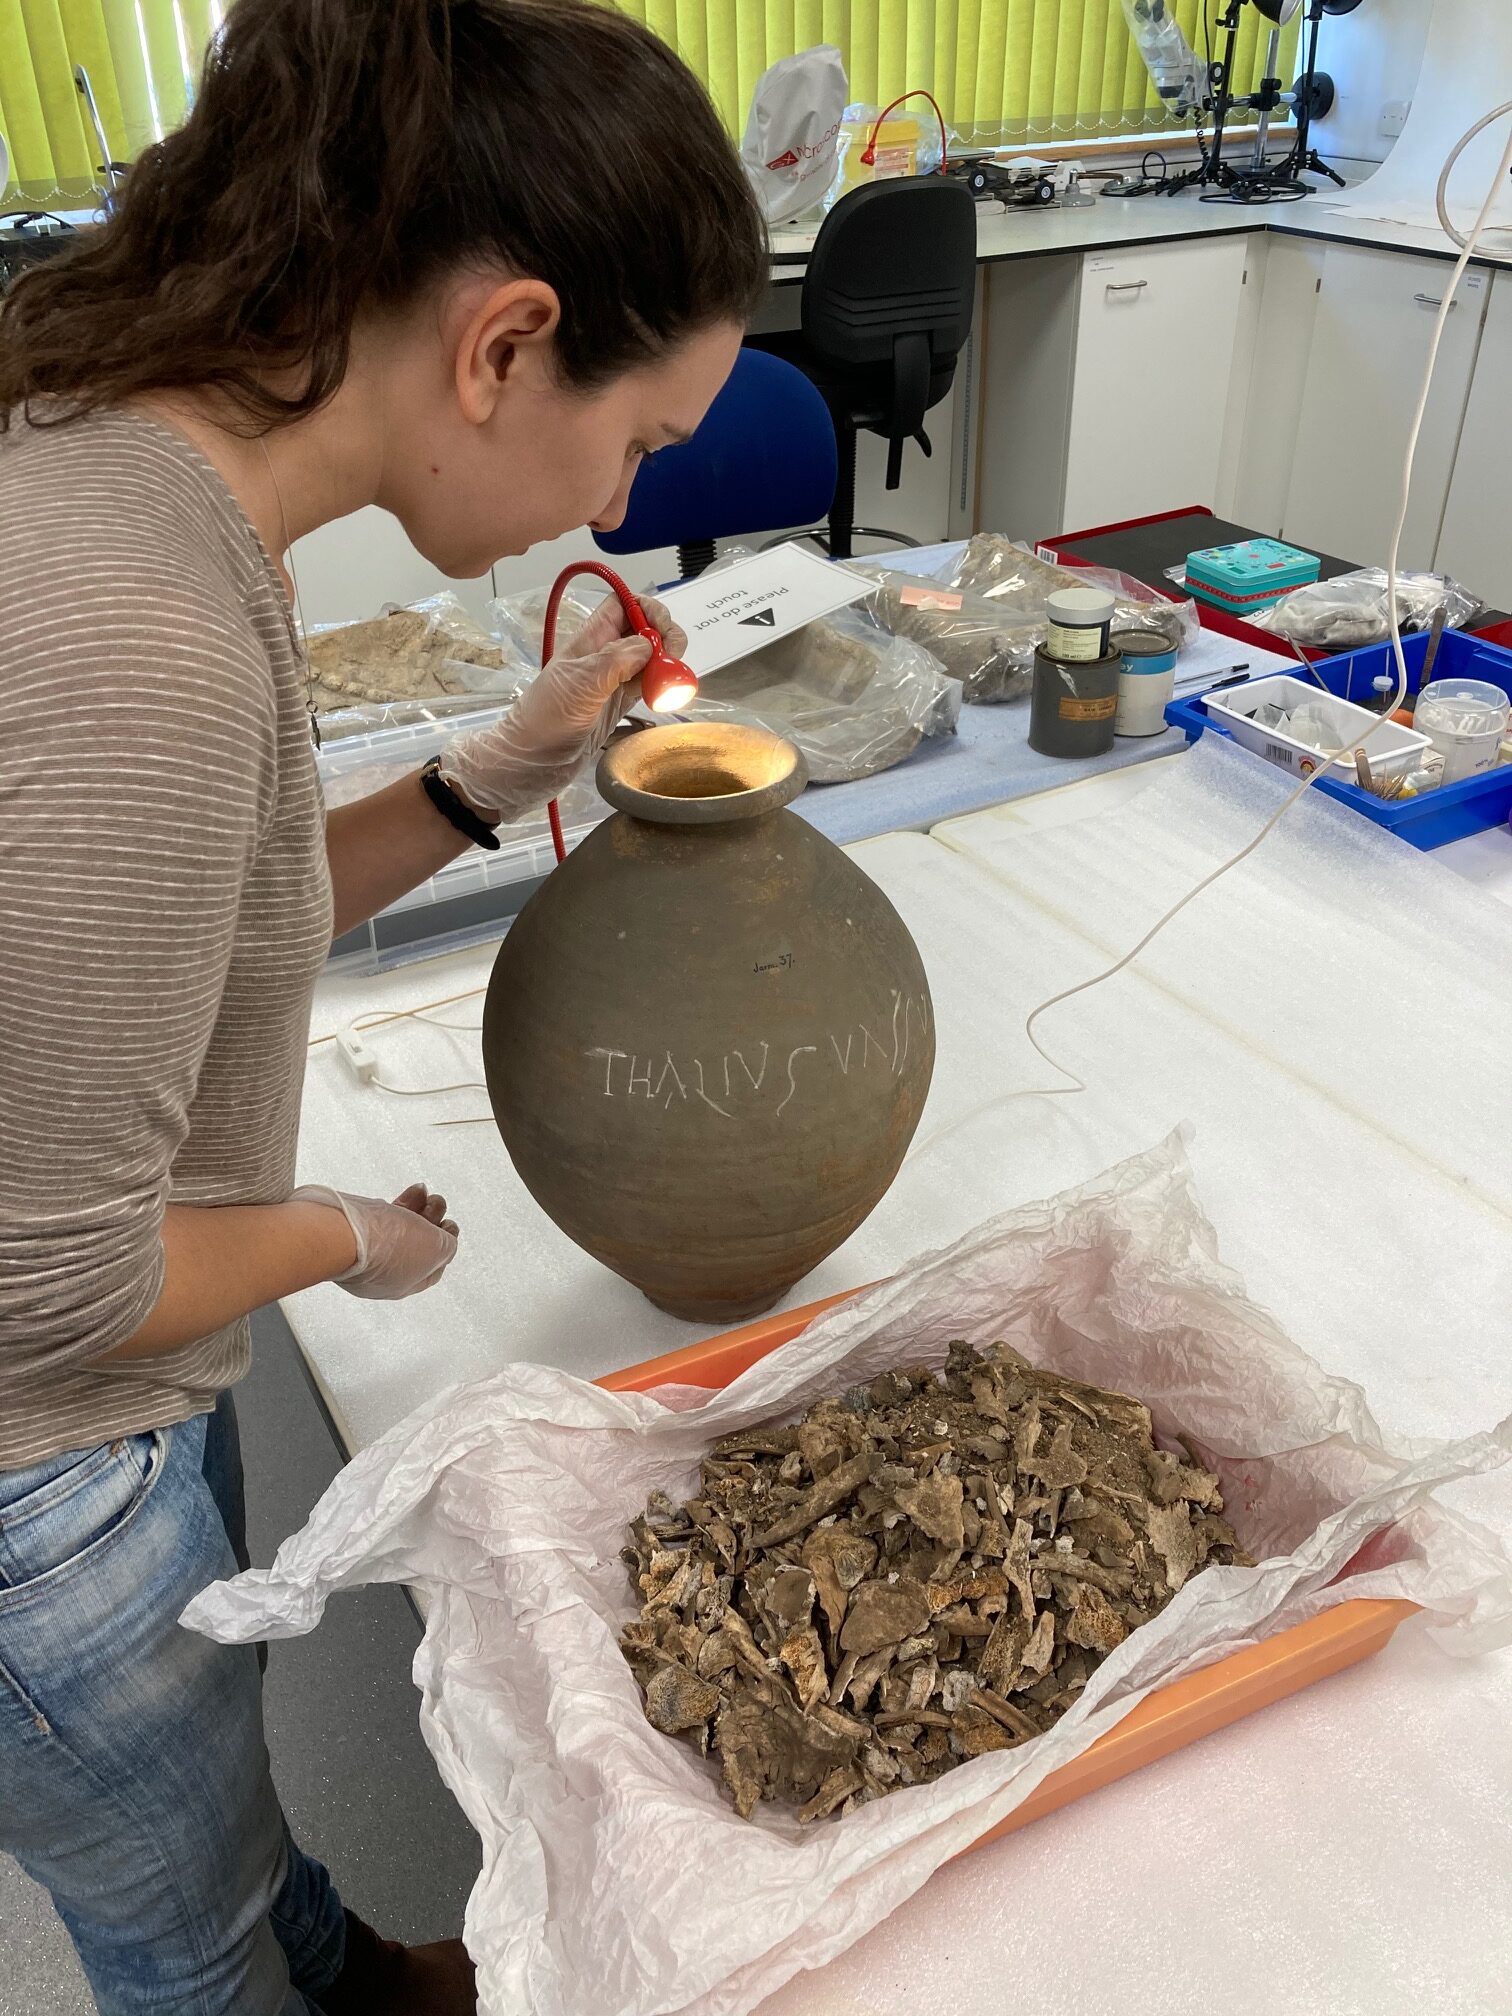 Colchester museums: Decoding the Dead. Researcher analysing remains